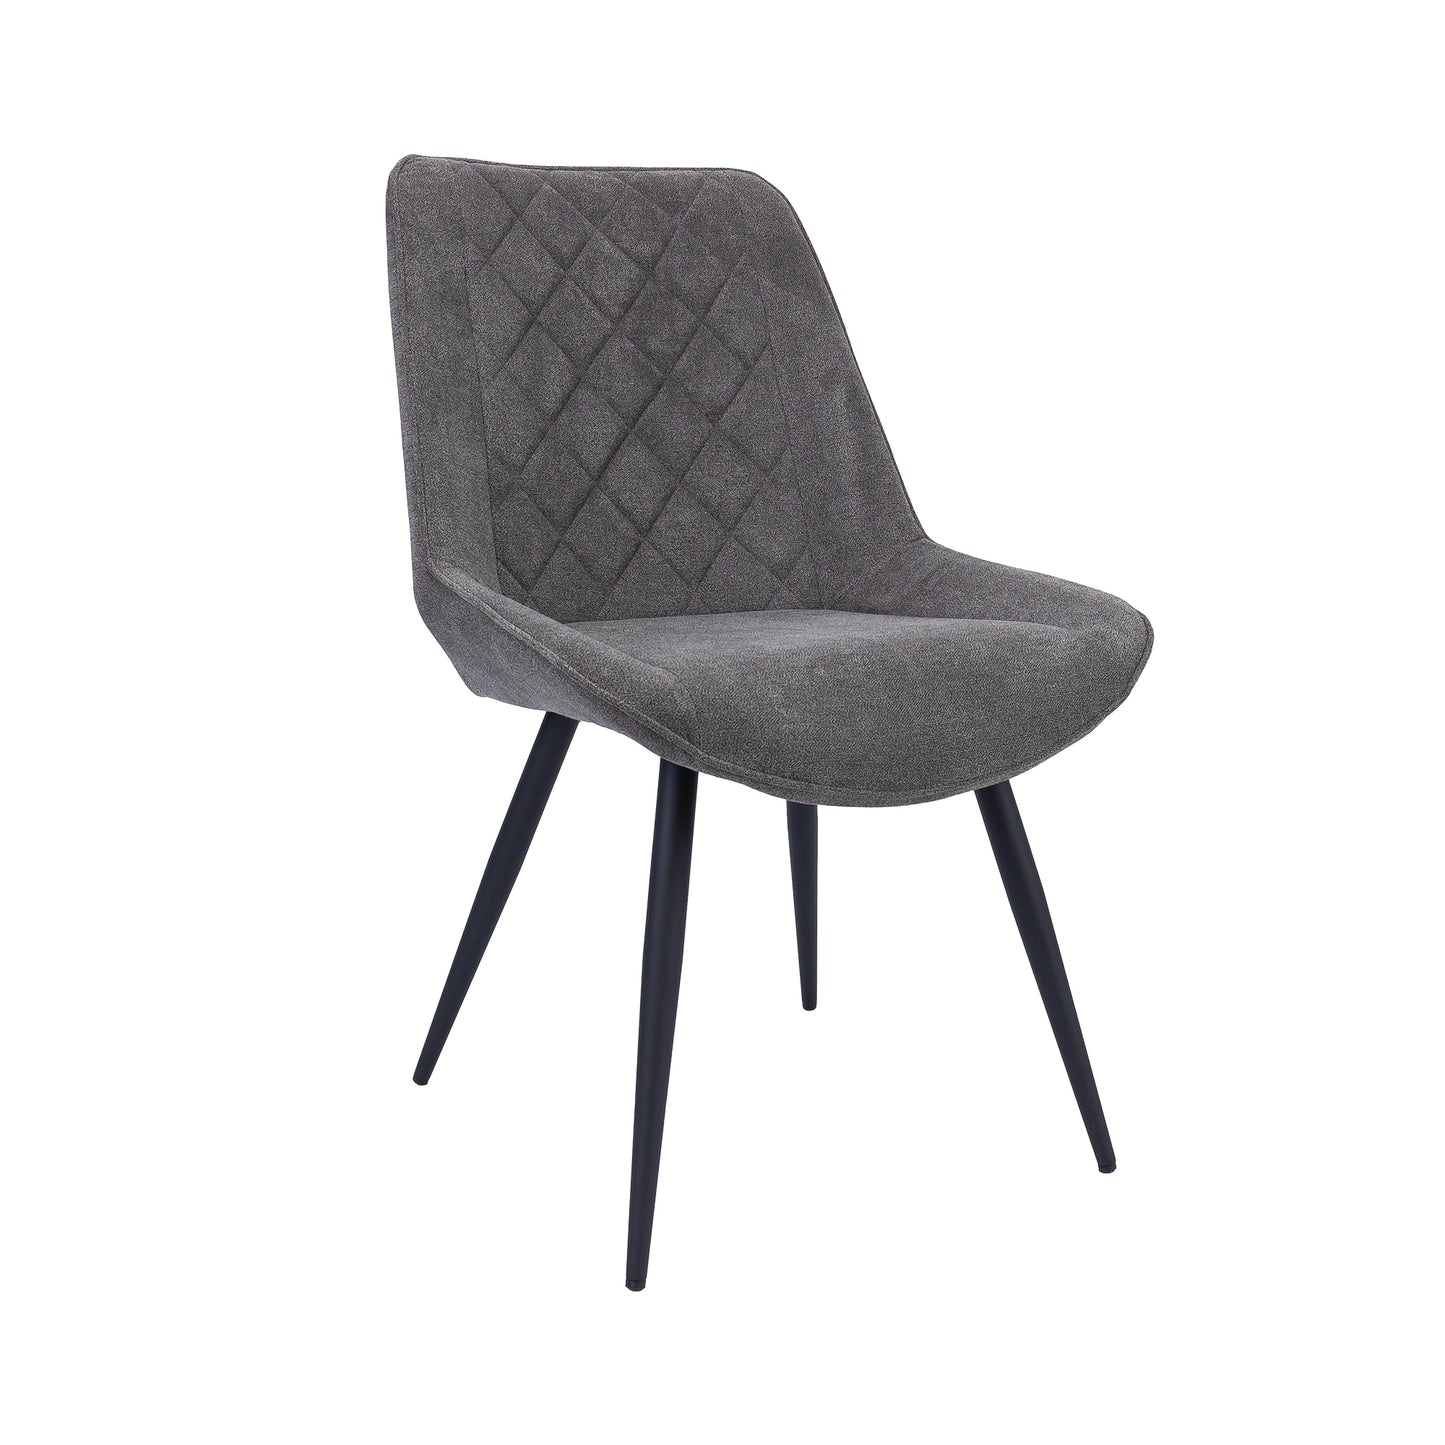 Helenium Dining Chair Set of 6 Fabric Seat with Metal Frame - Graphite